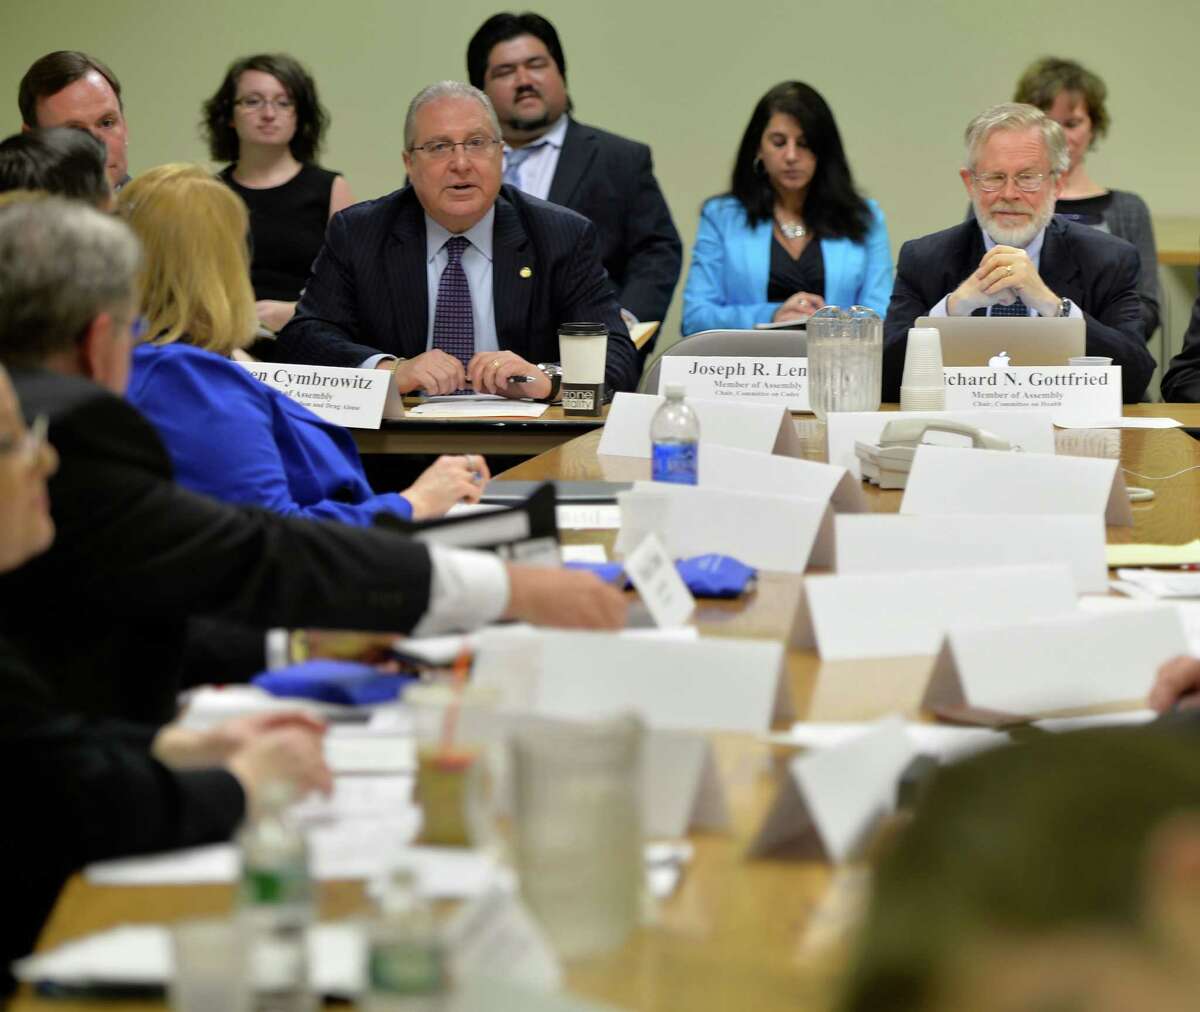 Alcoholism and Drug Abuse Committee Chair Steven Cymbrowitz, left, Health Committee Chair Richard N. Gottfried, right, take part in a New York State Assembly roundtable discussions on an opiate and heroin use crises within the state Monday morning, May 12, 2014, at the Legislative Office Building in Albany, N.Y. (Skip Dickstein / Times Union)